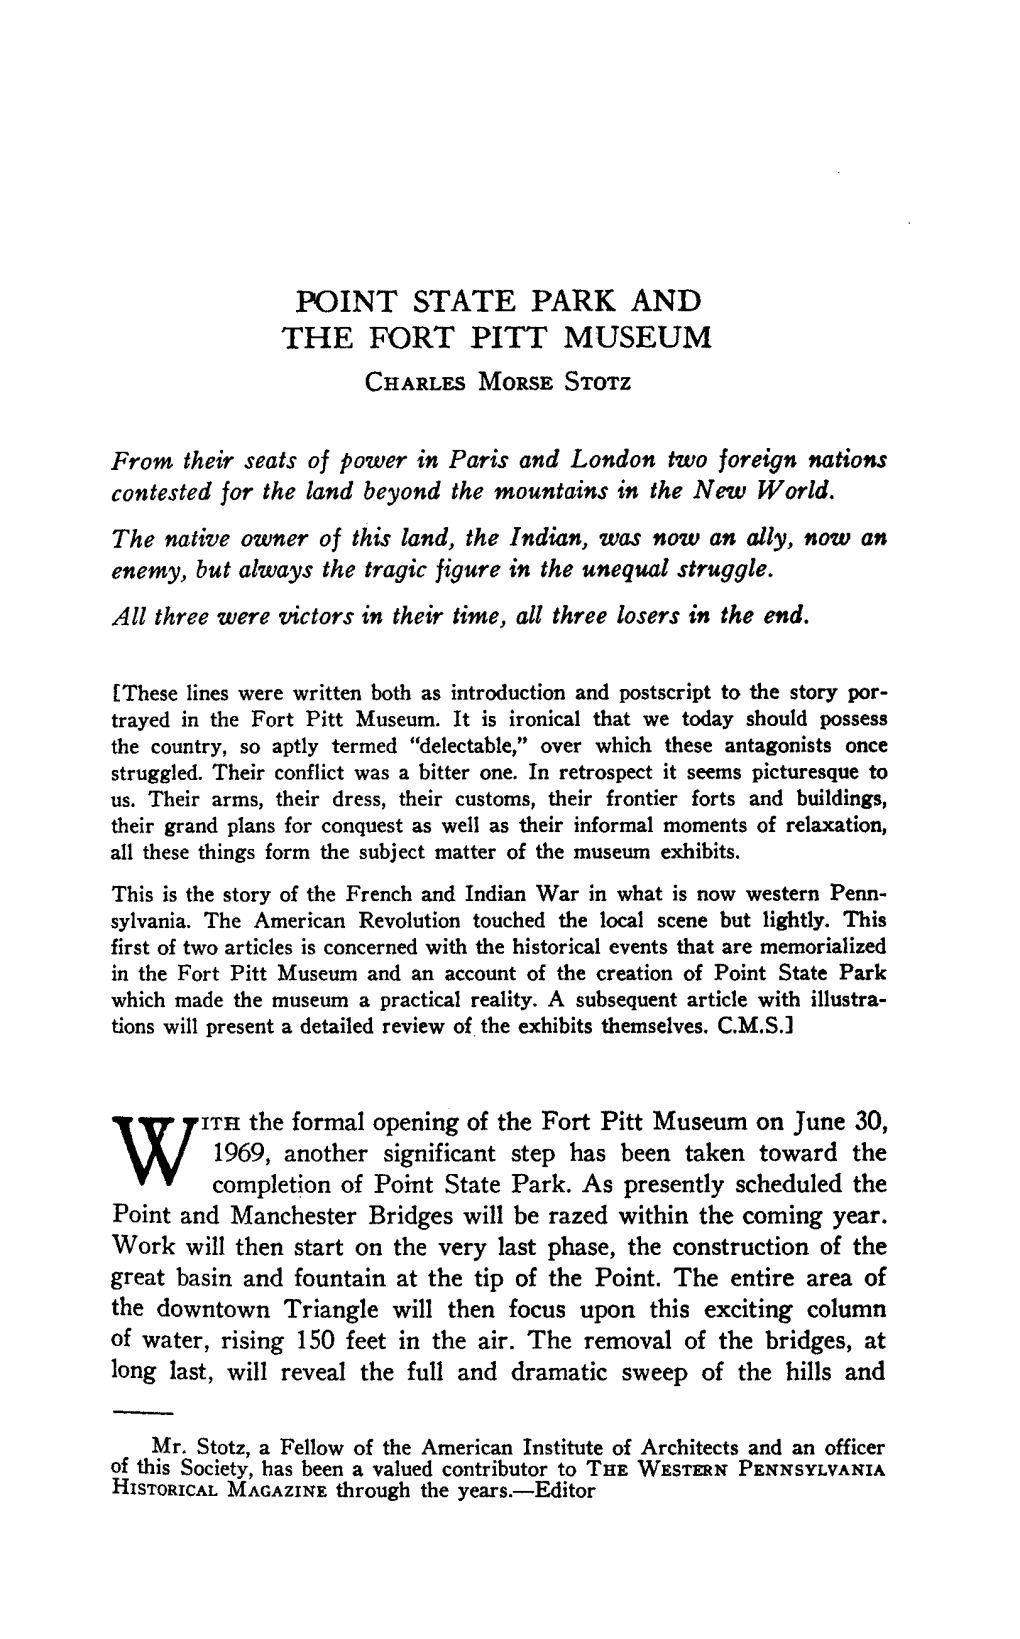 POINT STATE PARK and the FORT PITT MUSEUM Charles Morse Stotz